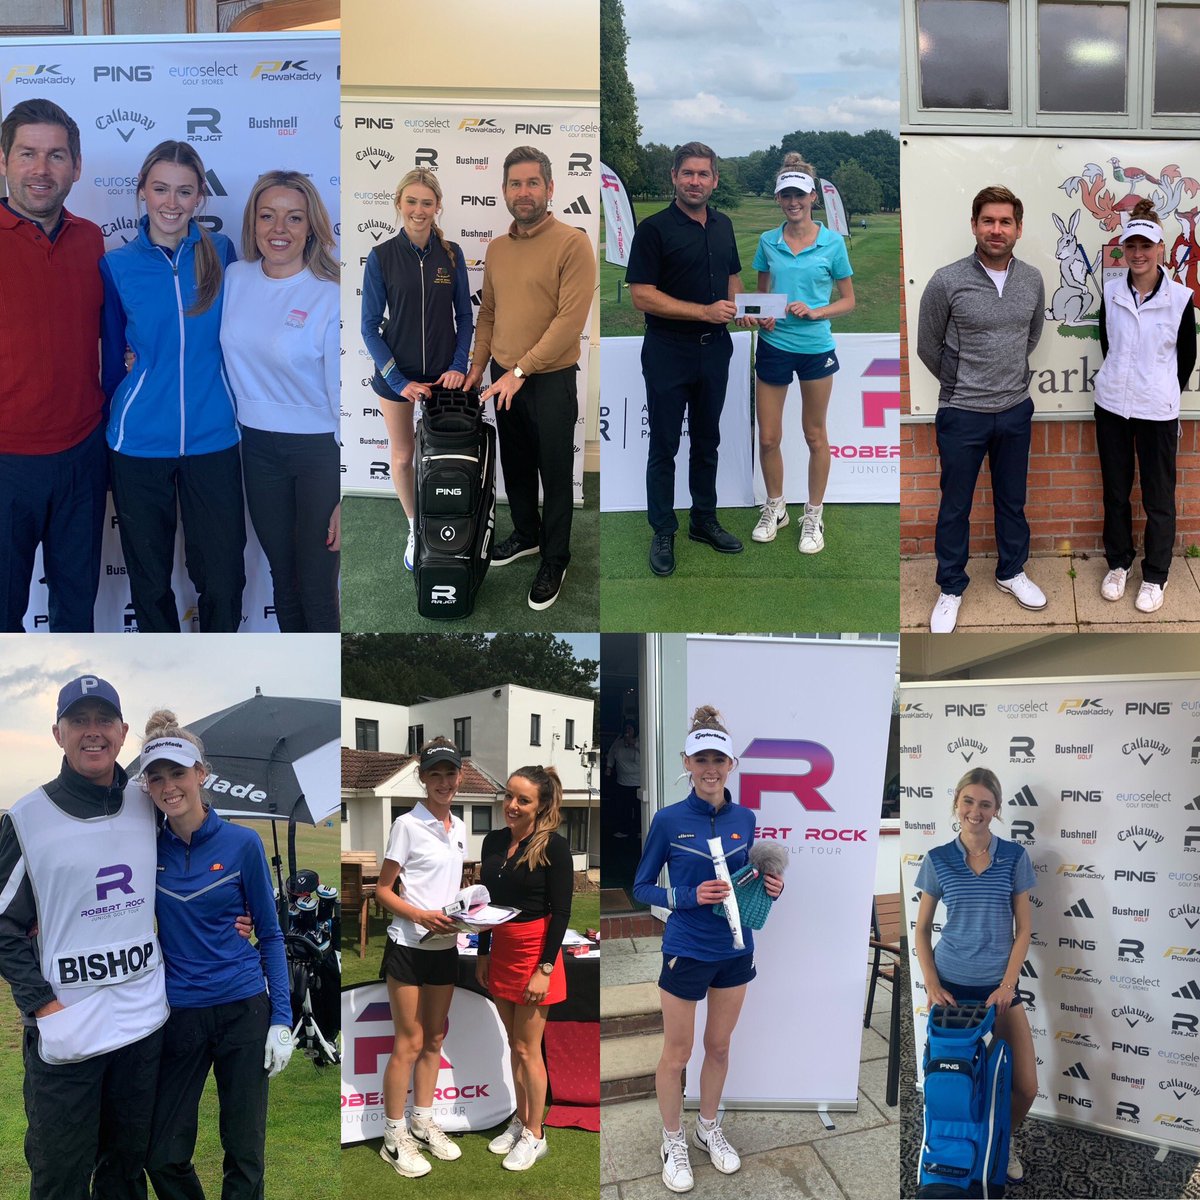 Today drew an end to 3 great years on the @robrockgolftour A MASSIVE THANKS to both Rob & Nat for organising the tour for juniors. I’ve made great friends, played amazing courses all thanks to the Tour which has set me up for the next chapter in my golfing life in the USA🇺🇸⛳️🙏